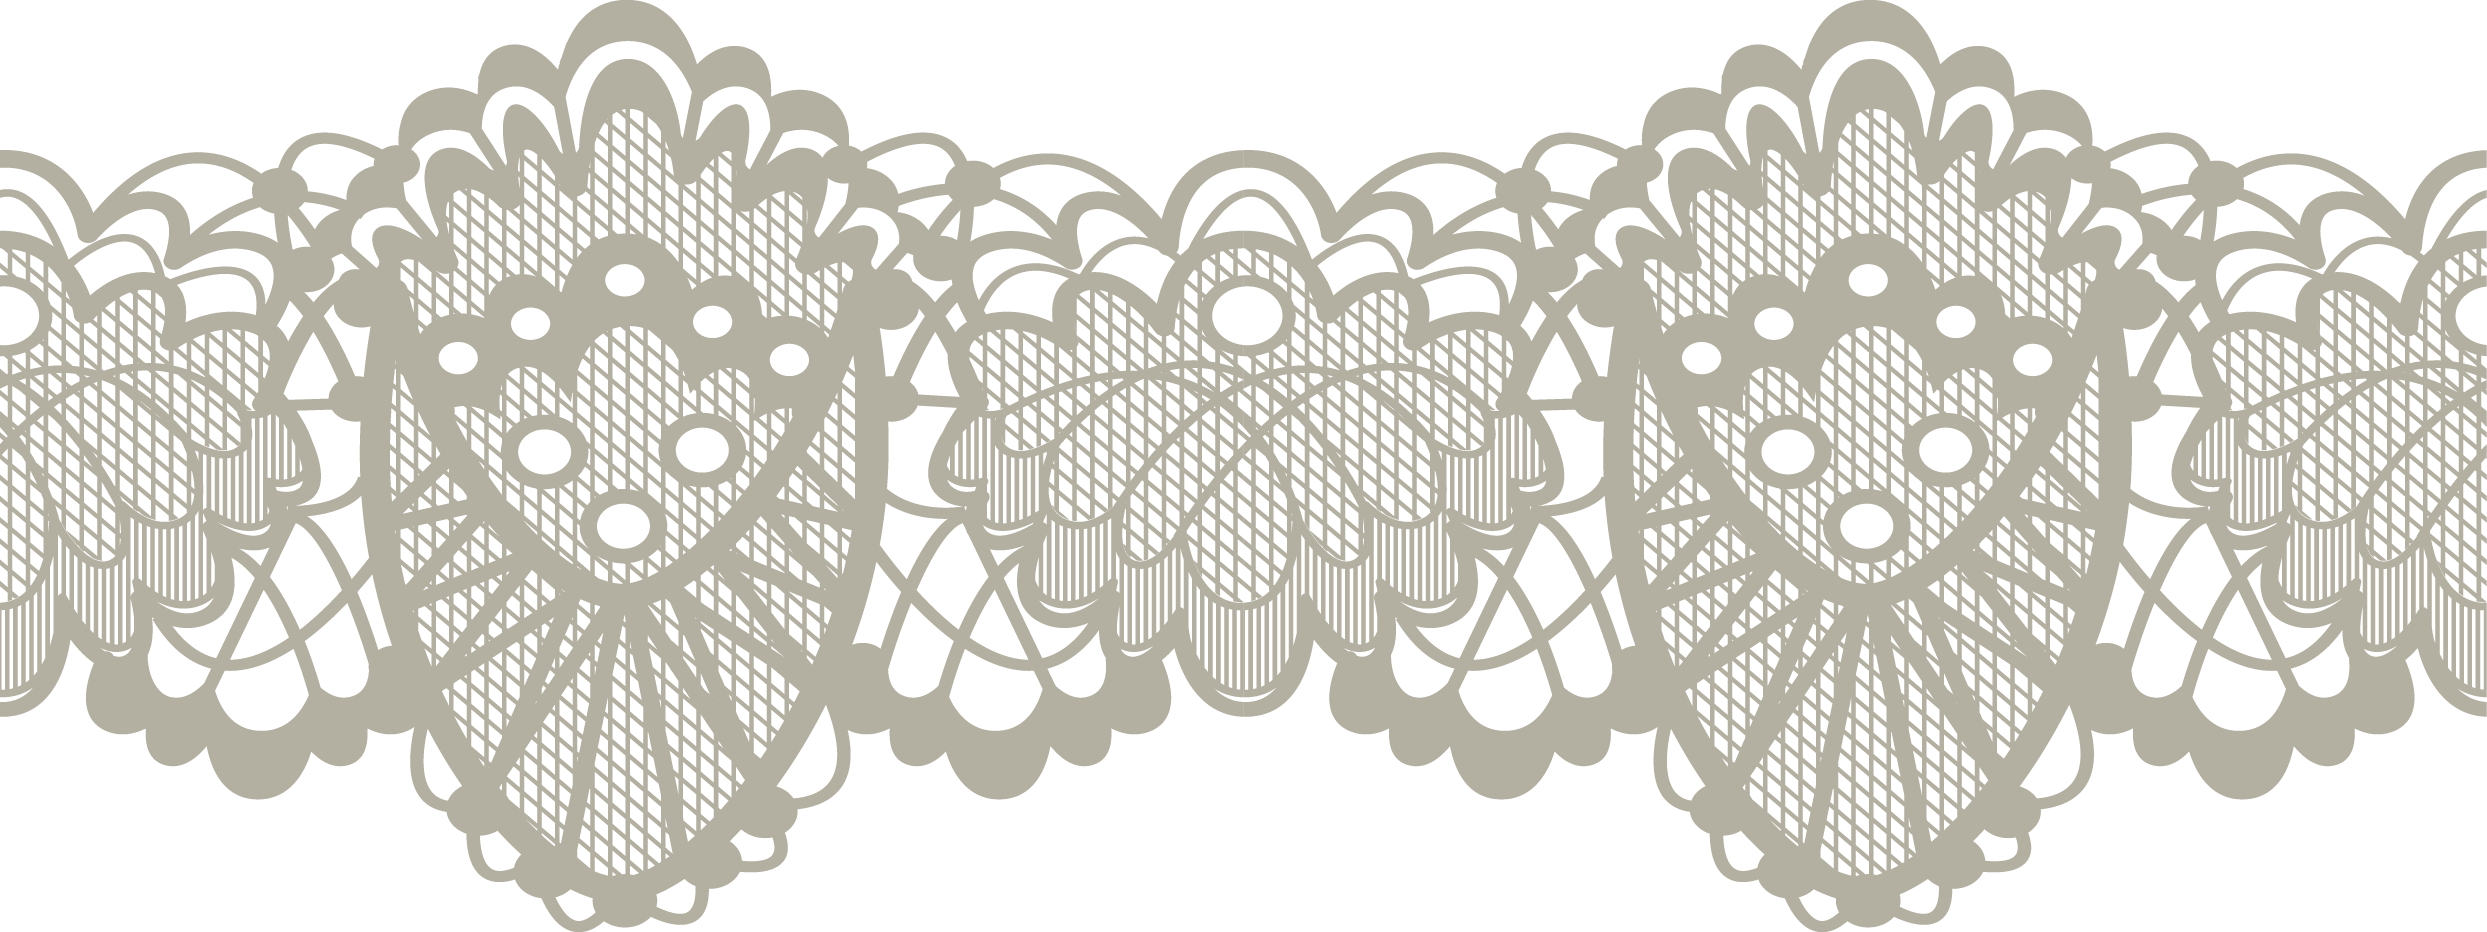 Lace Textile Clip art - Lace Boarder png download - 2487*932 - Free ...